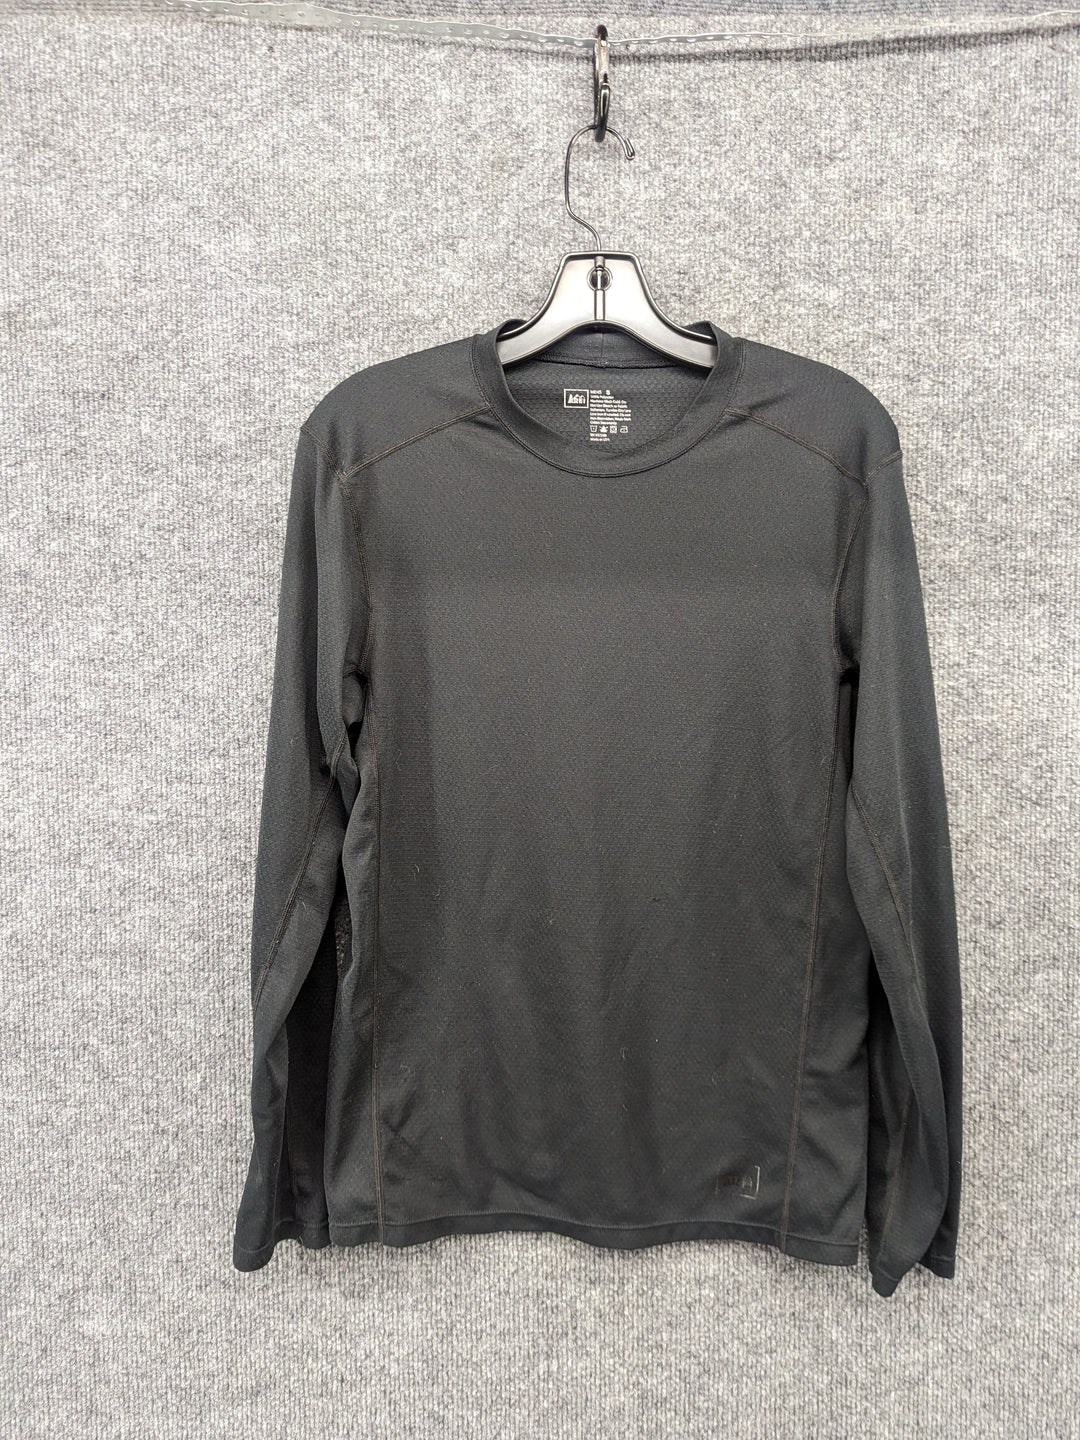 REI Size Small Men's Base Layer Top